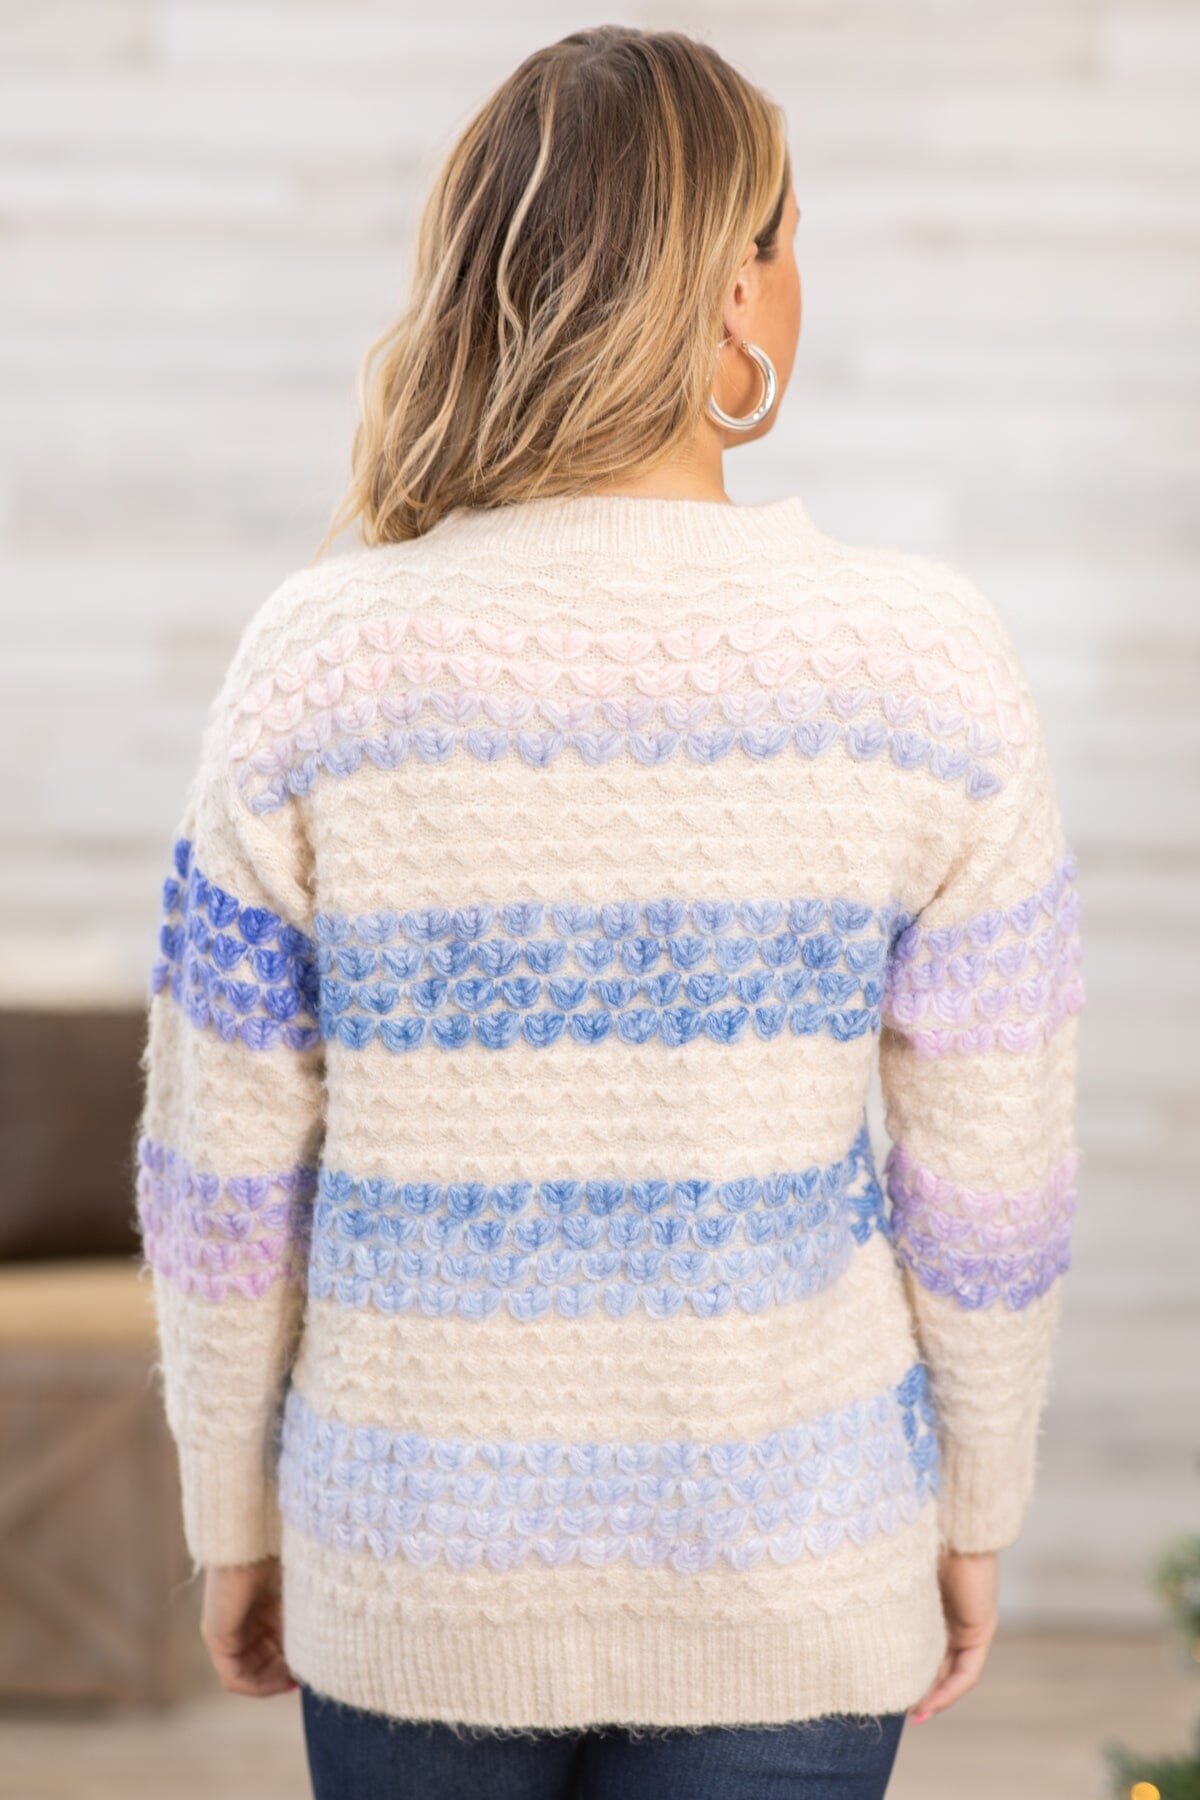 Cream and Blue Ombre Textured Sweater - Filly Flair